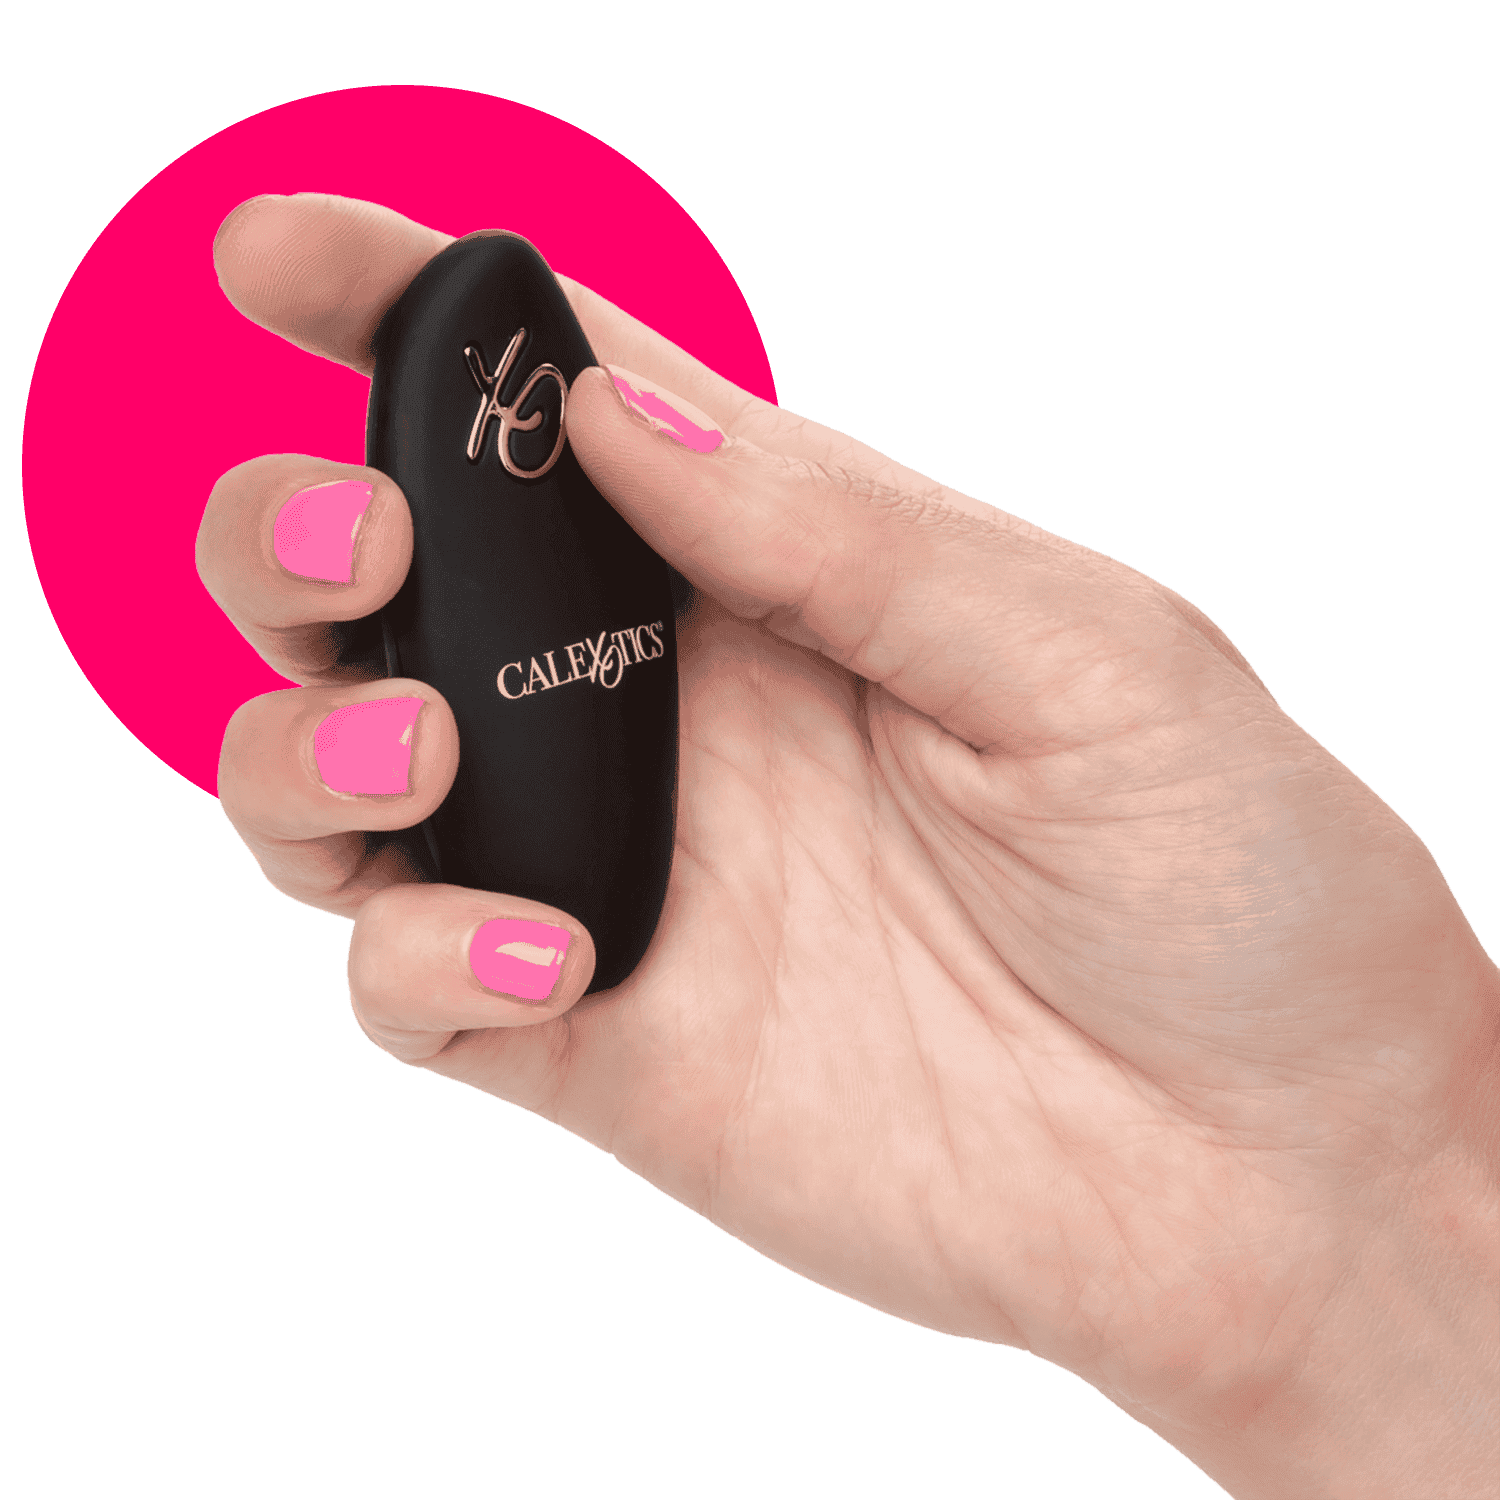 CalExotics Silicone Remote Rechargeable Curve